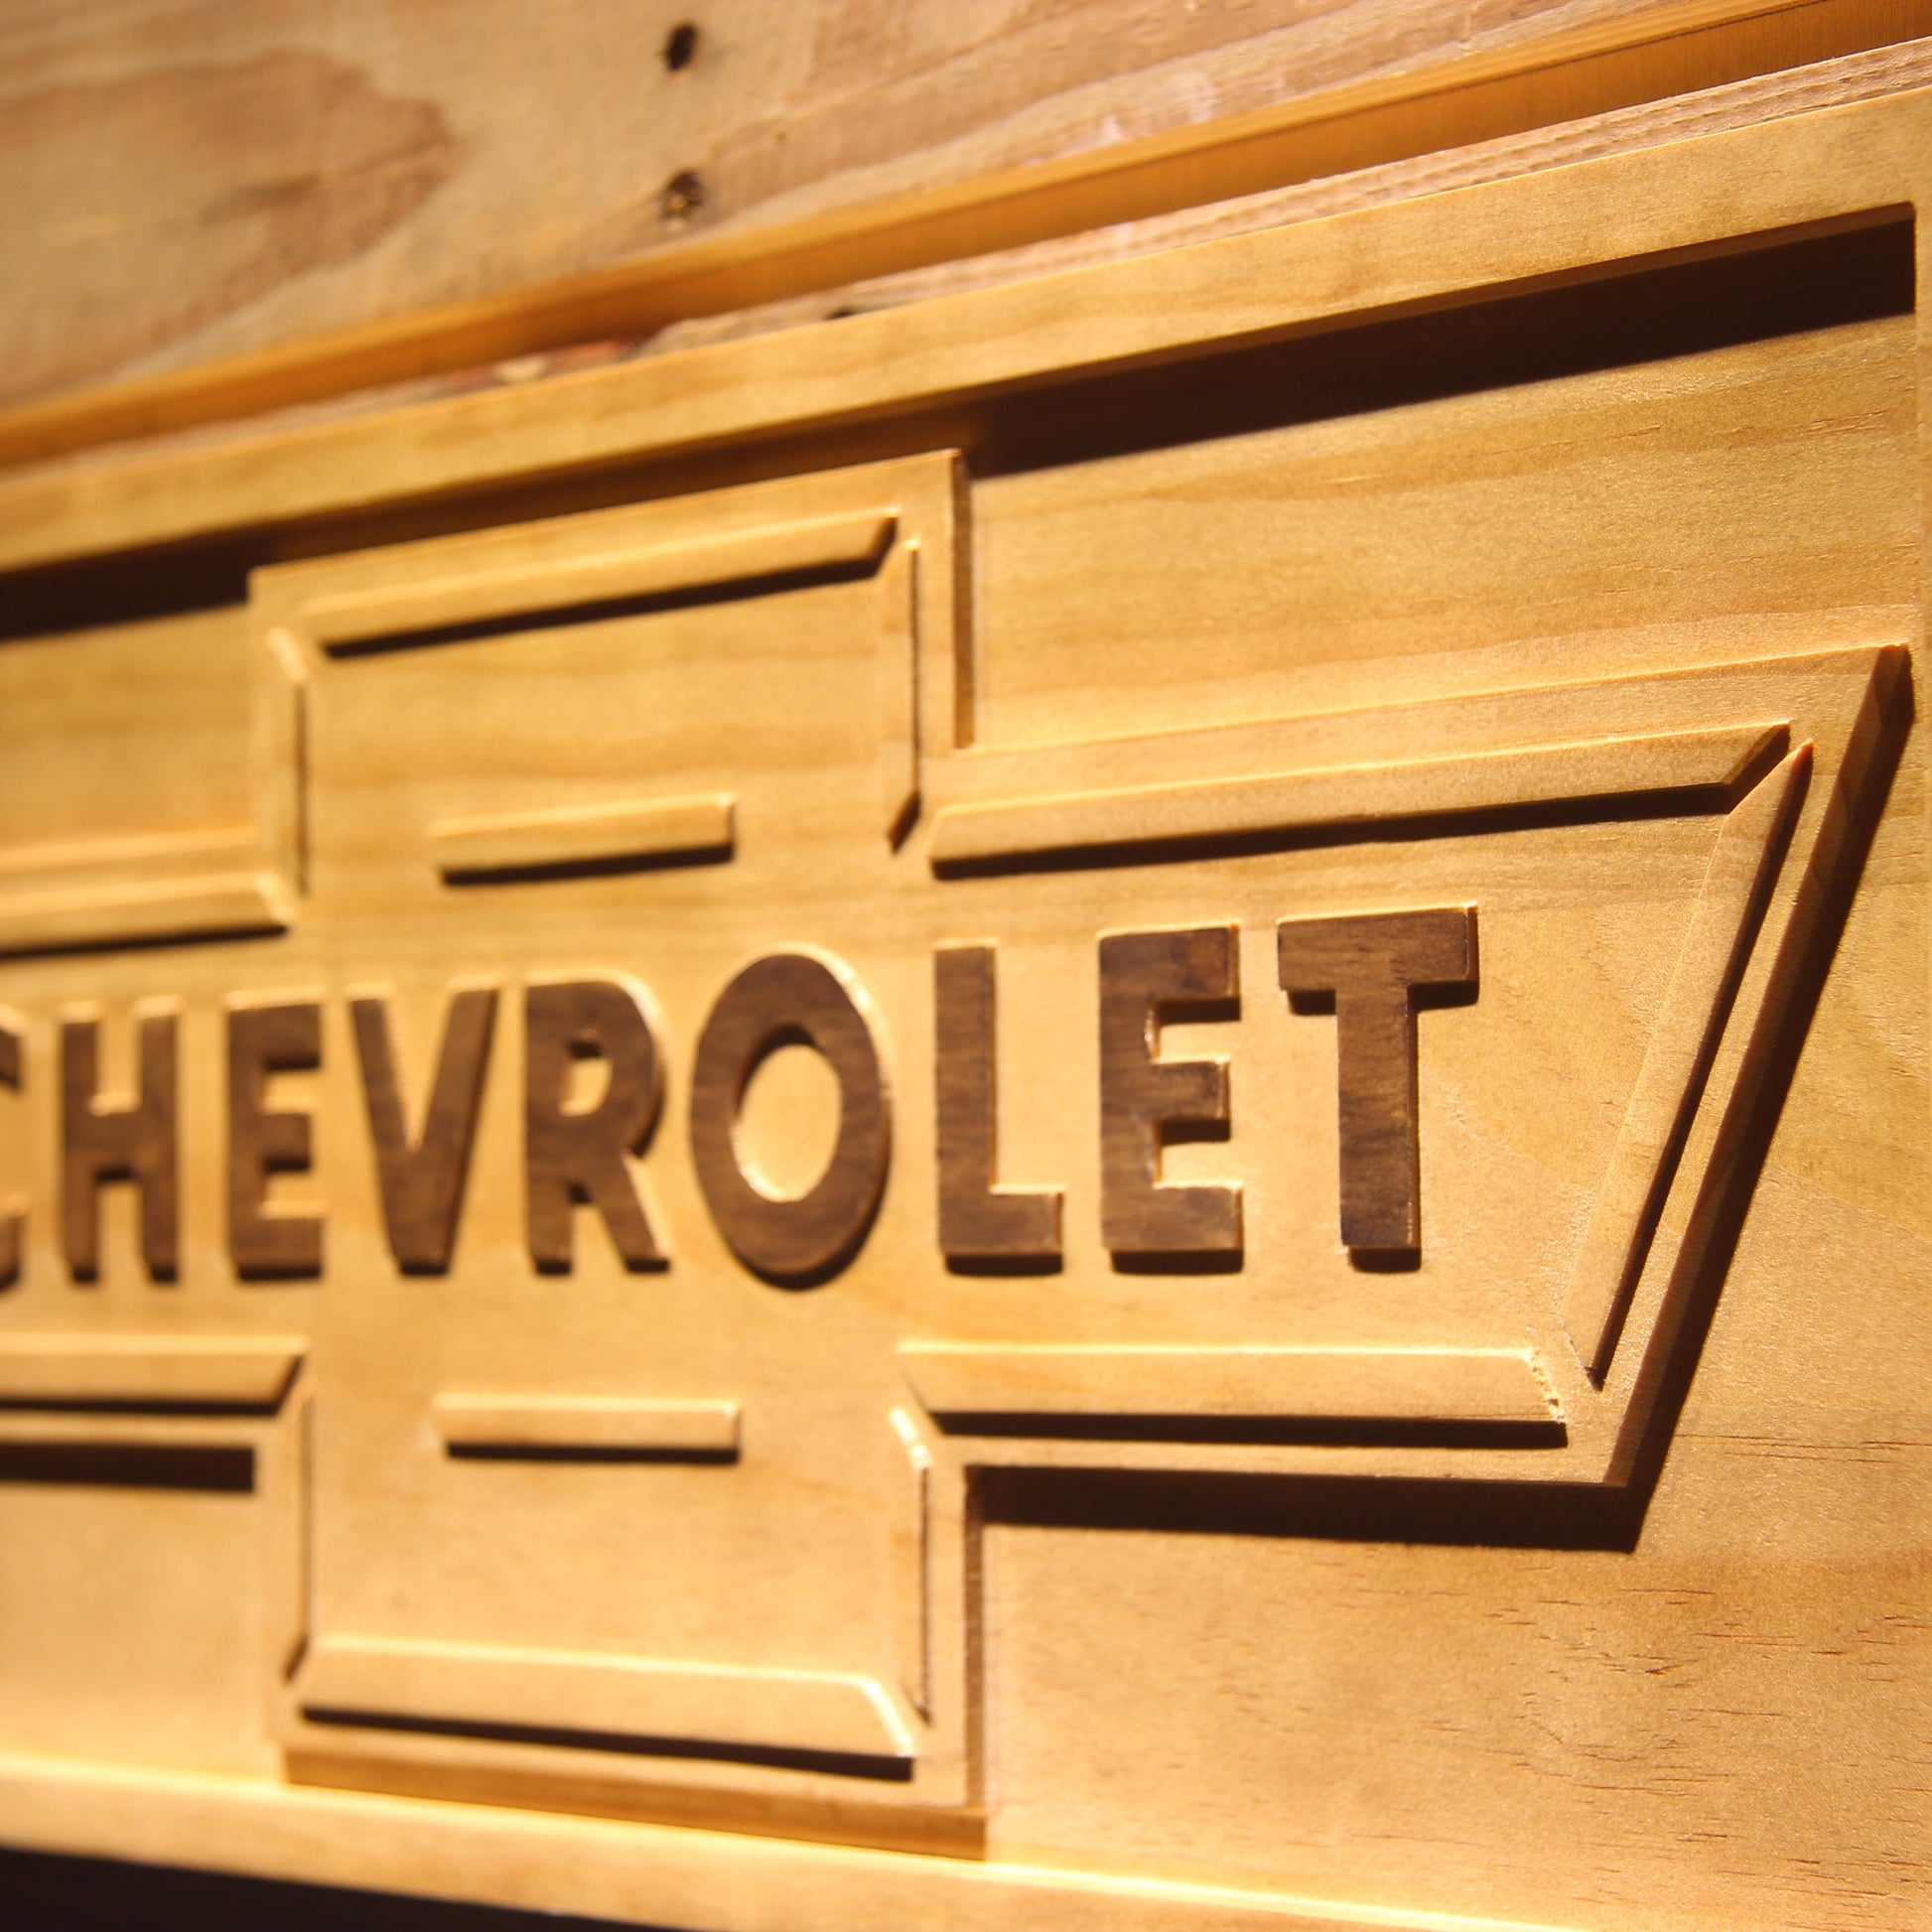 Chevrolet Car 3D Wooden Bar Signs by Woody Signs Co. - Handmade Crafted Unique Wooden Creative